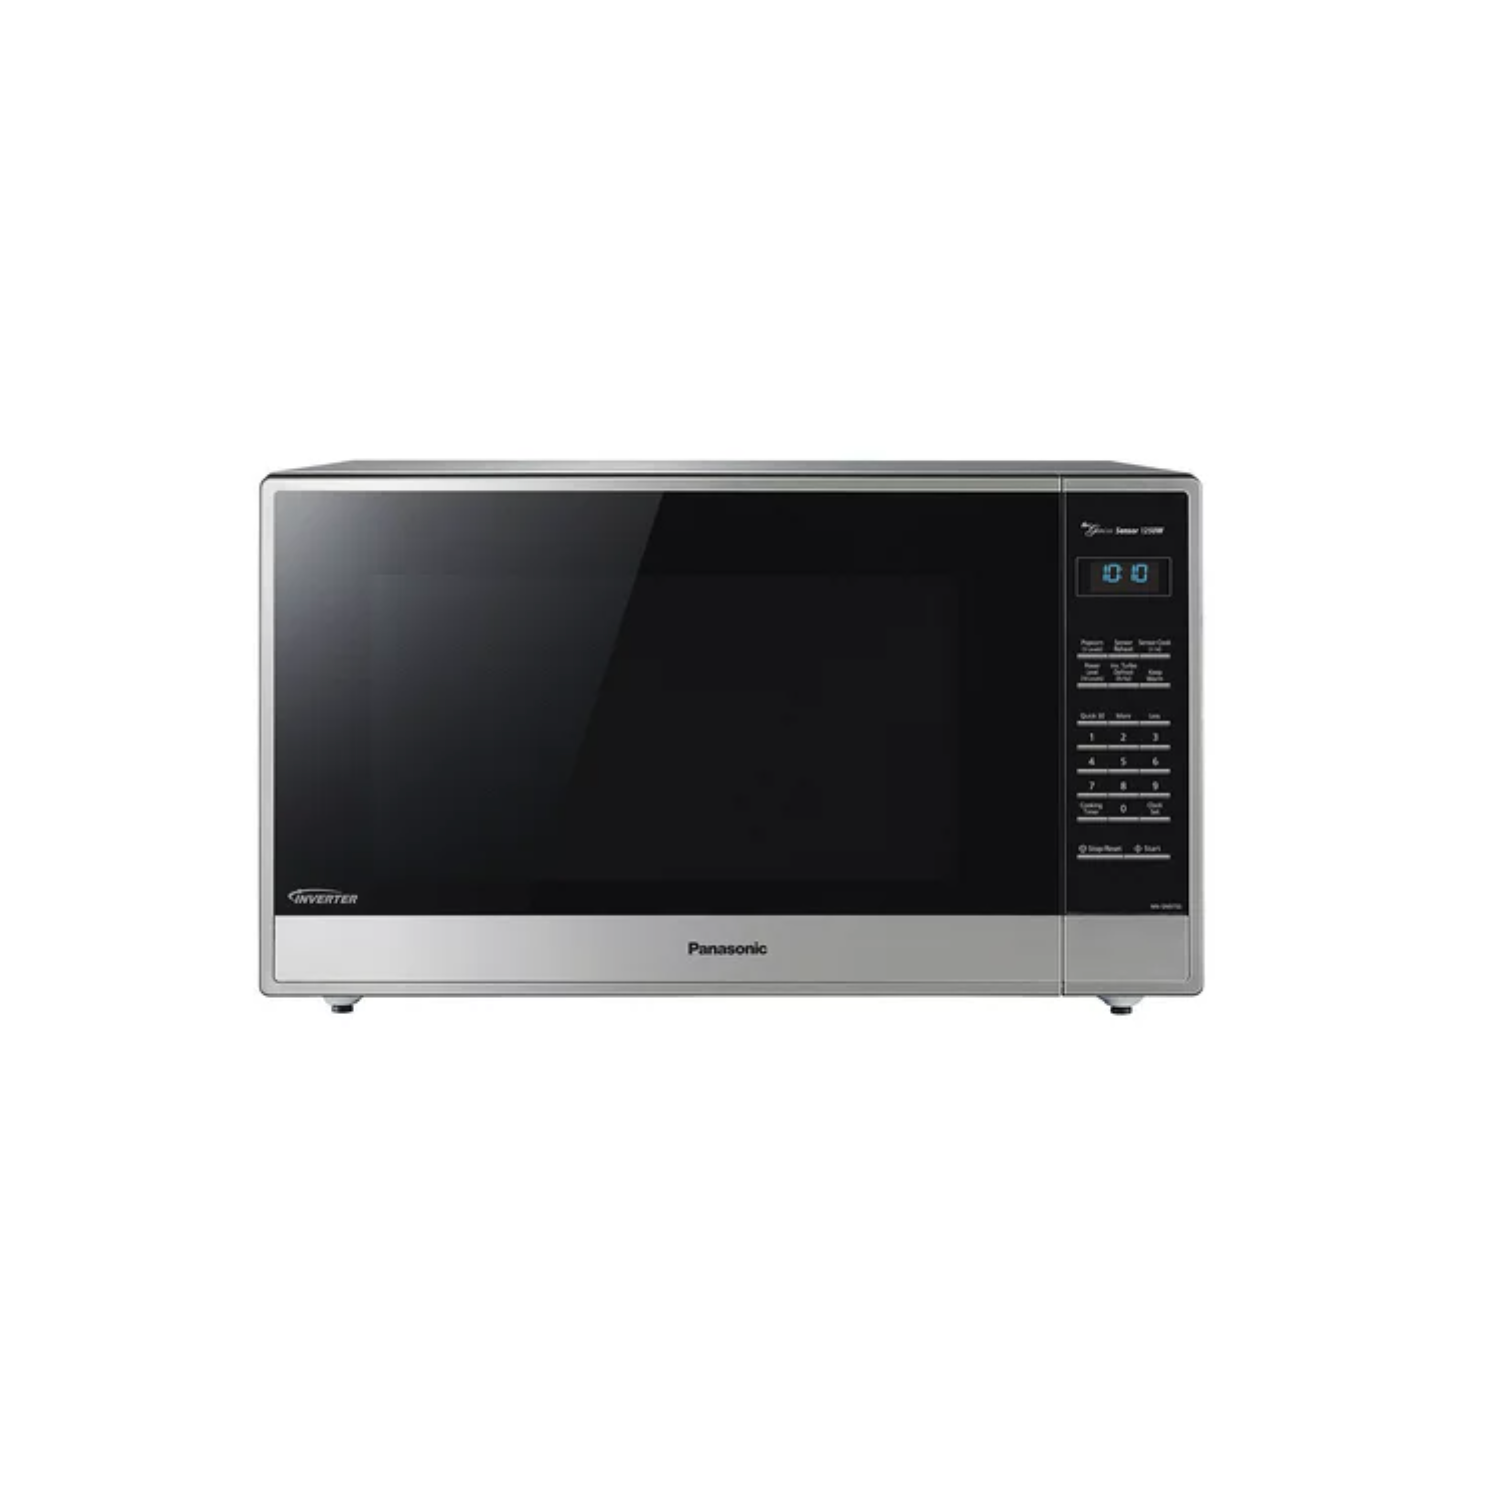 Panasonic 2.2 cu. ft. Stainless-Steel Microwave Oven with Inverter Technology - NN-SN975S